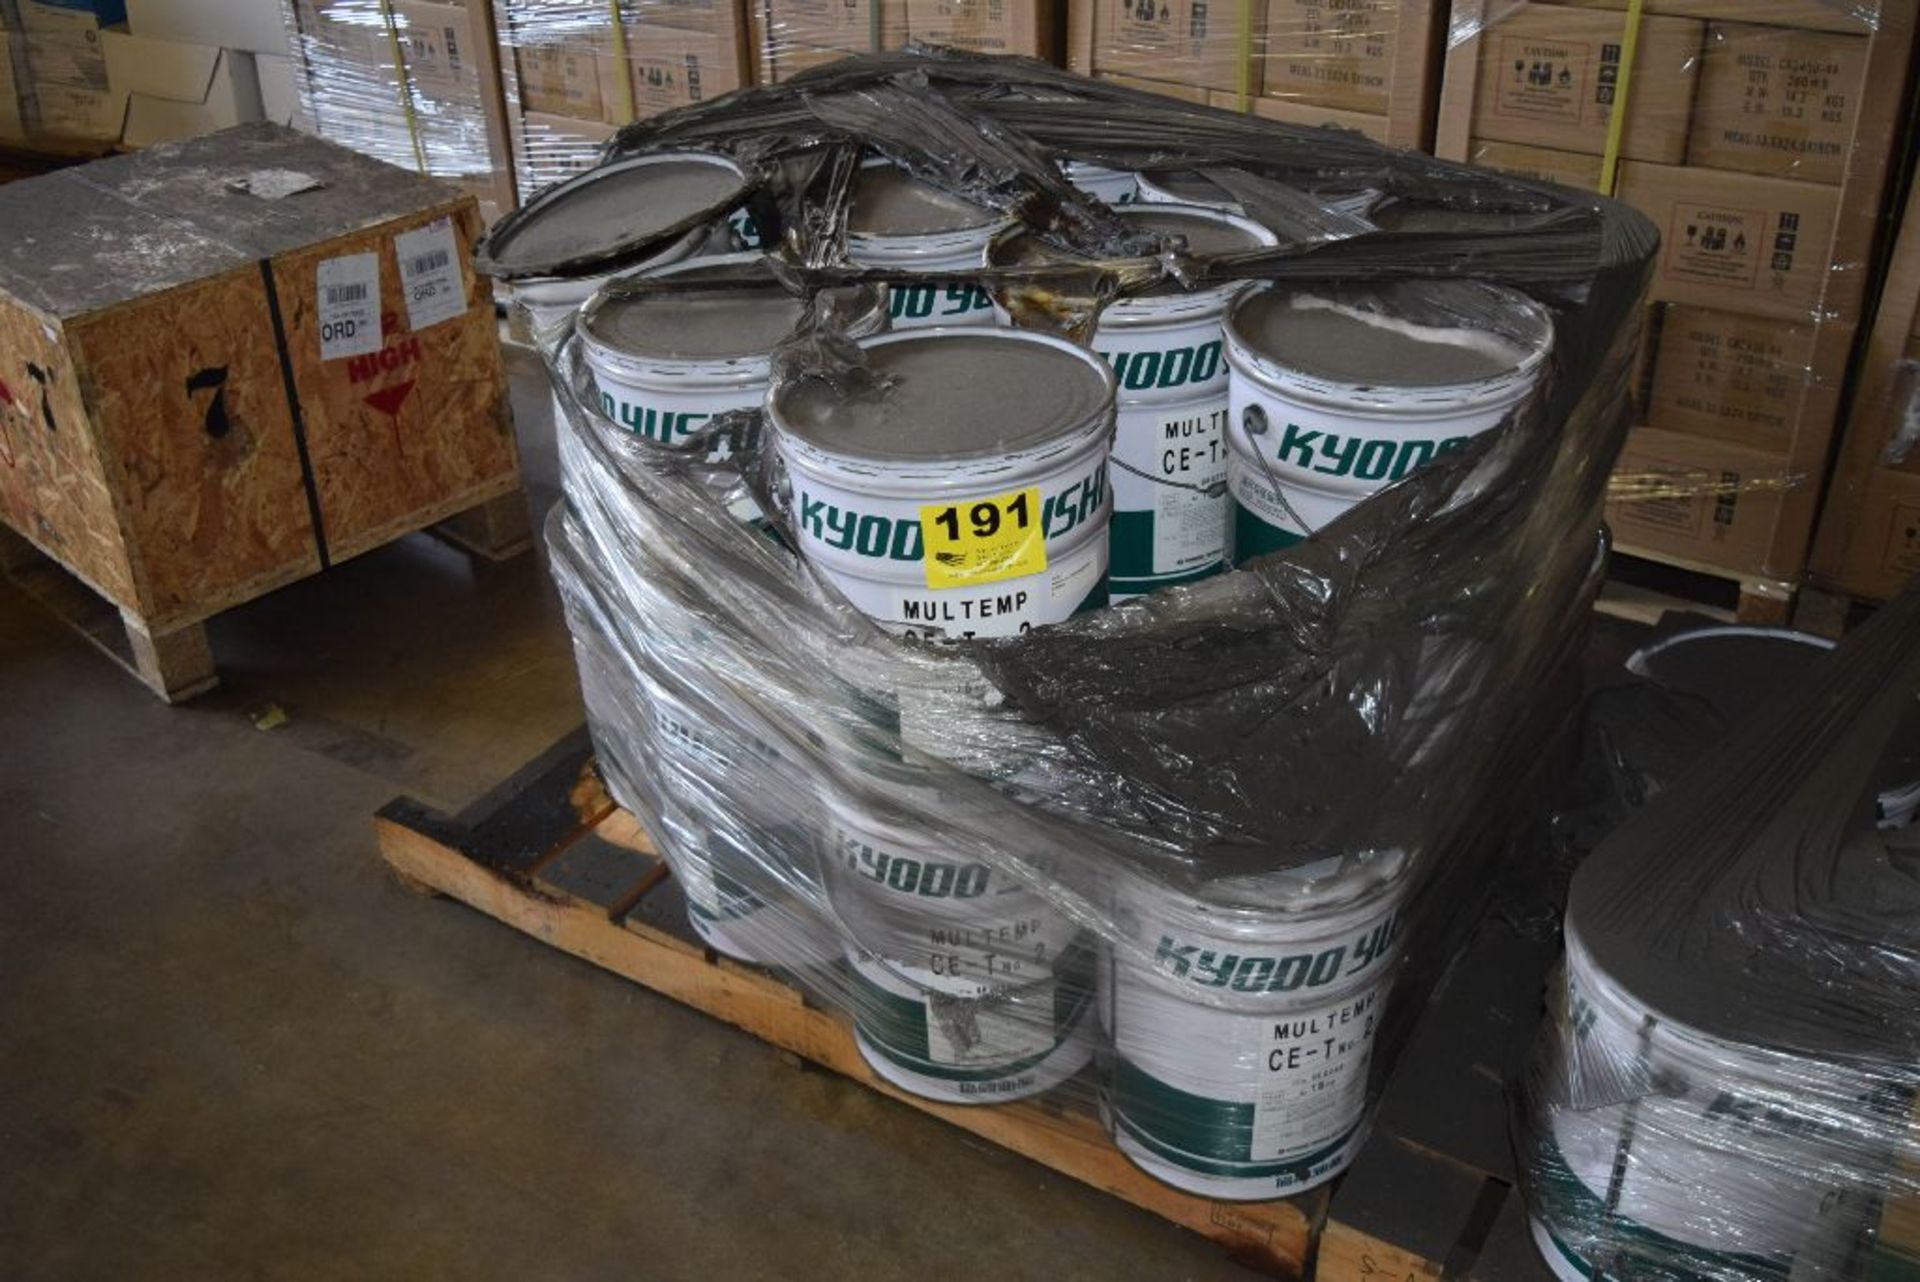 DRUMS KYODO YUSHI CE-T NO. 2 LUBRICANTS ON ONE SKID